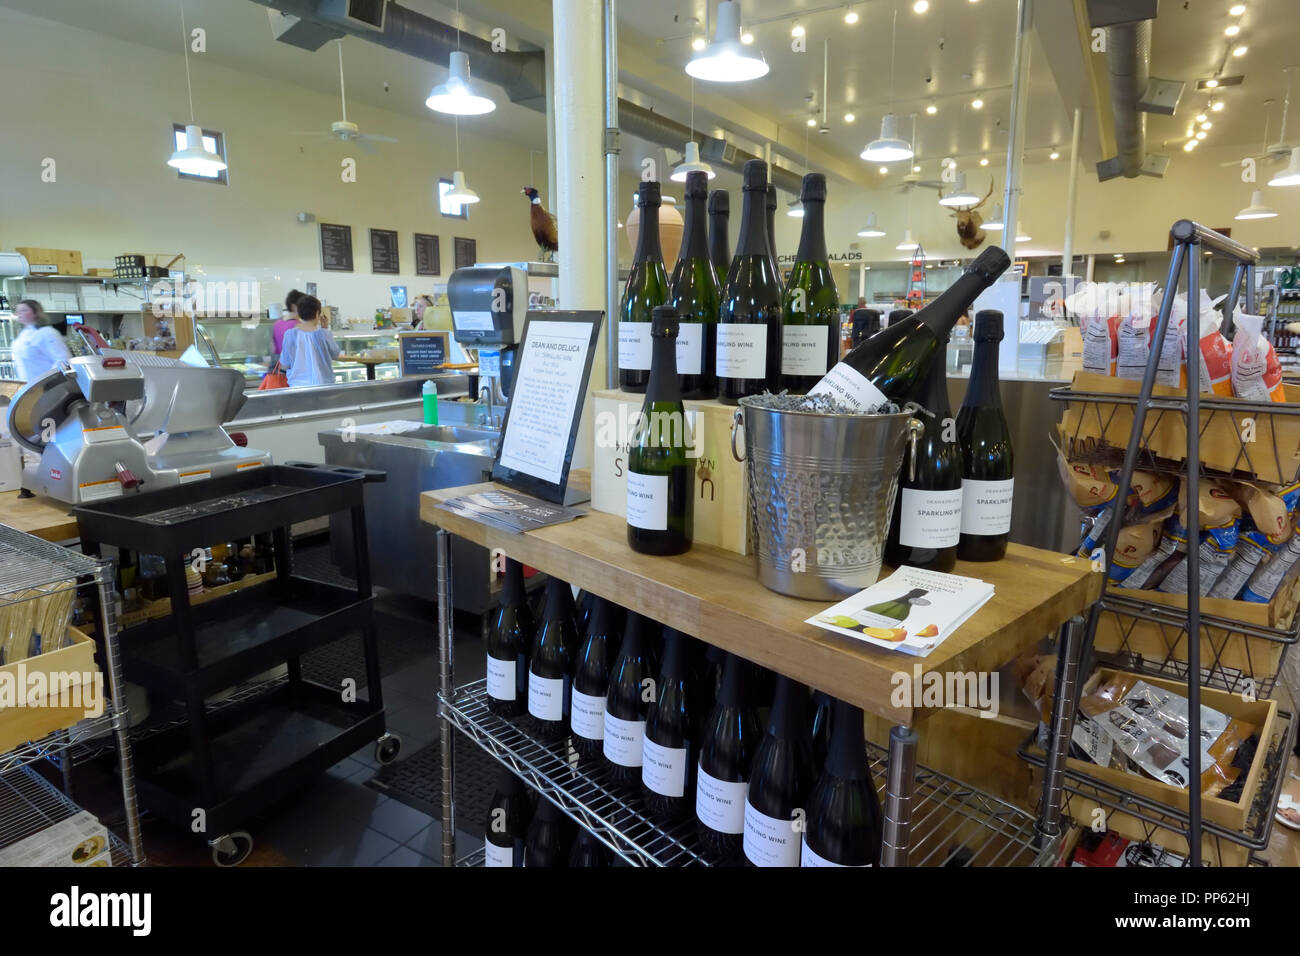 The upscale grocery store of Dean & DeLuca in Napa Valley, St Helena  CA Stock Photo